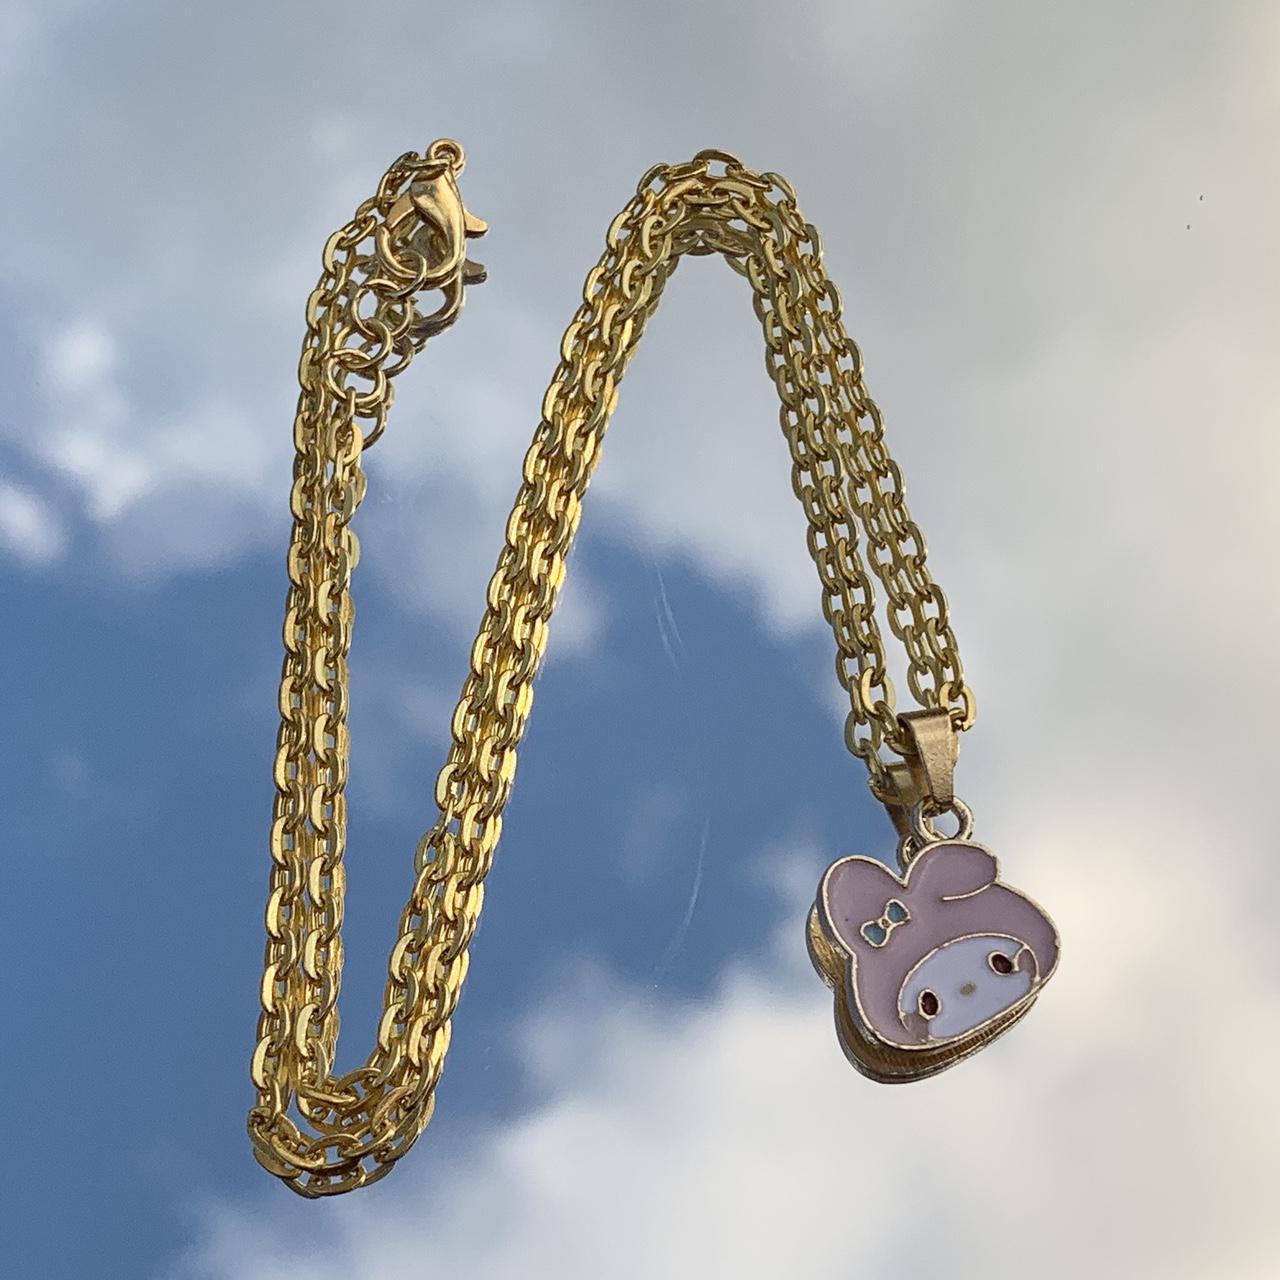 Product Image 2 - my melody necklace

• the necklace